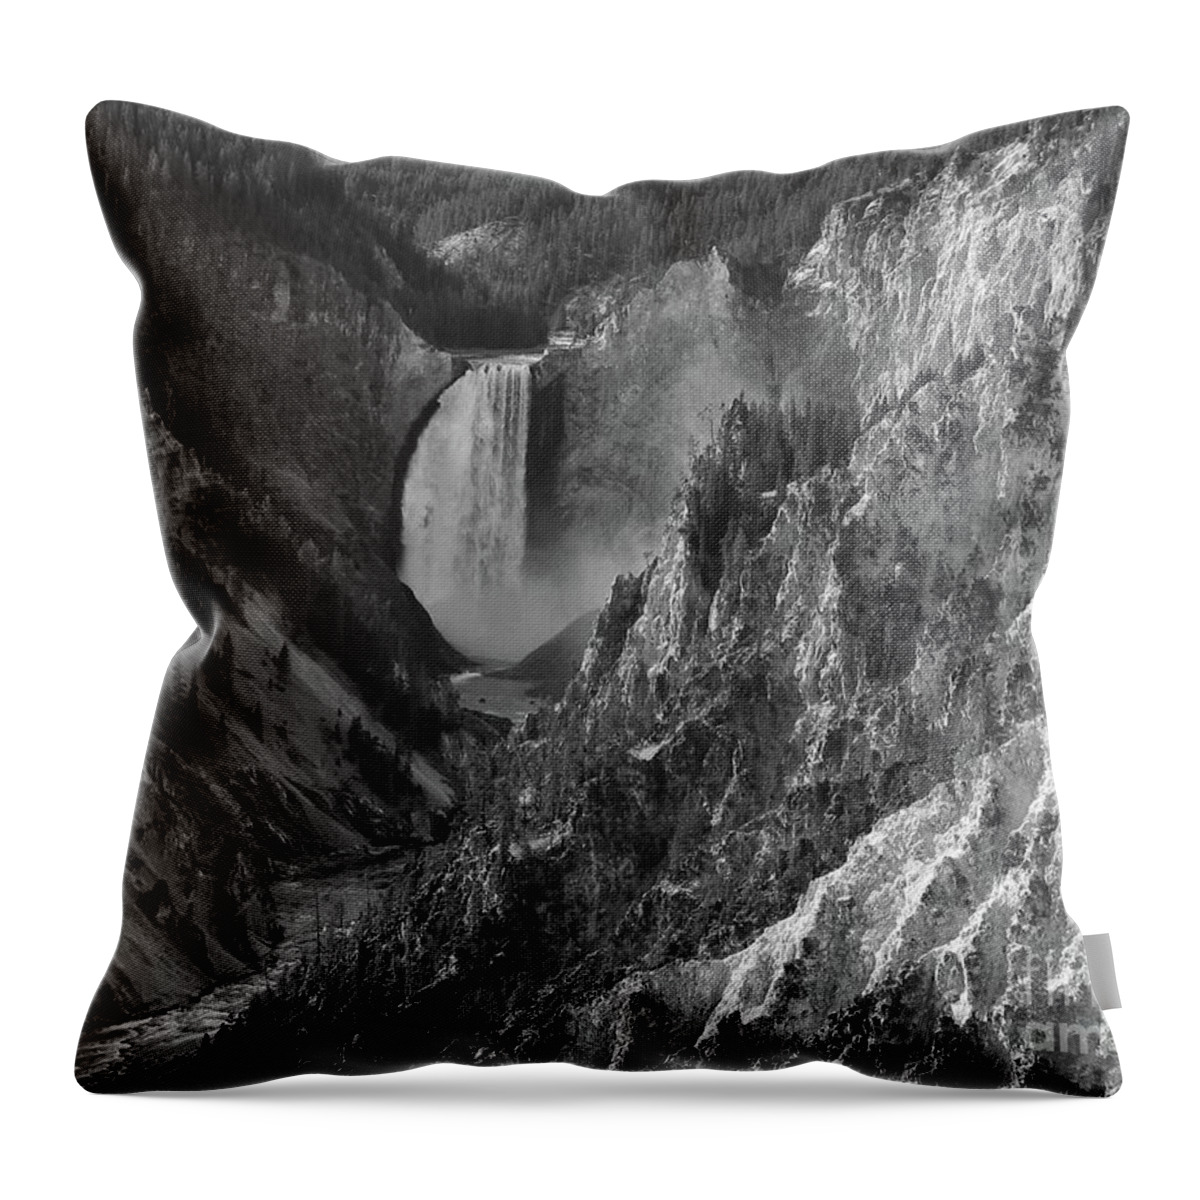 Landscape Throw Pillow featuring the photograph Lower Falls by Sheila Ping